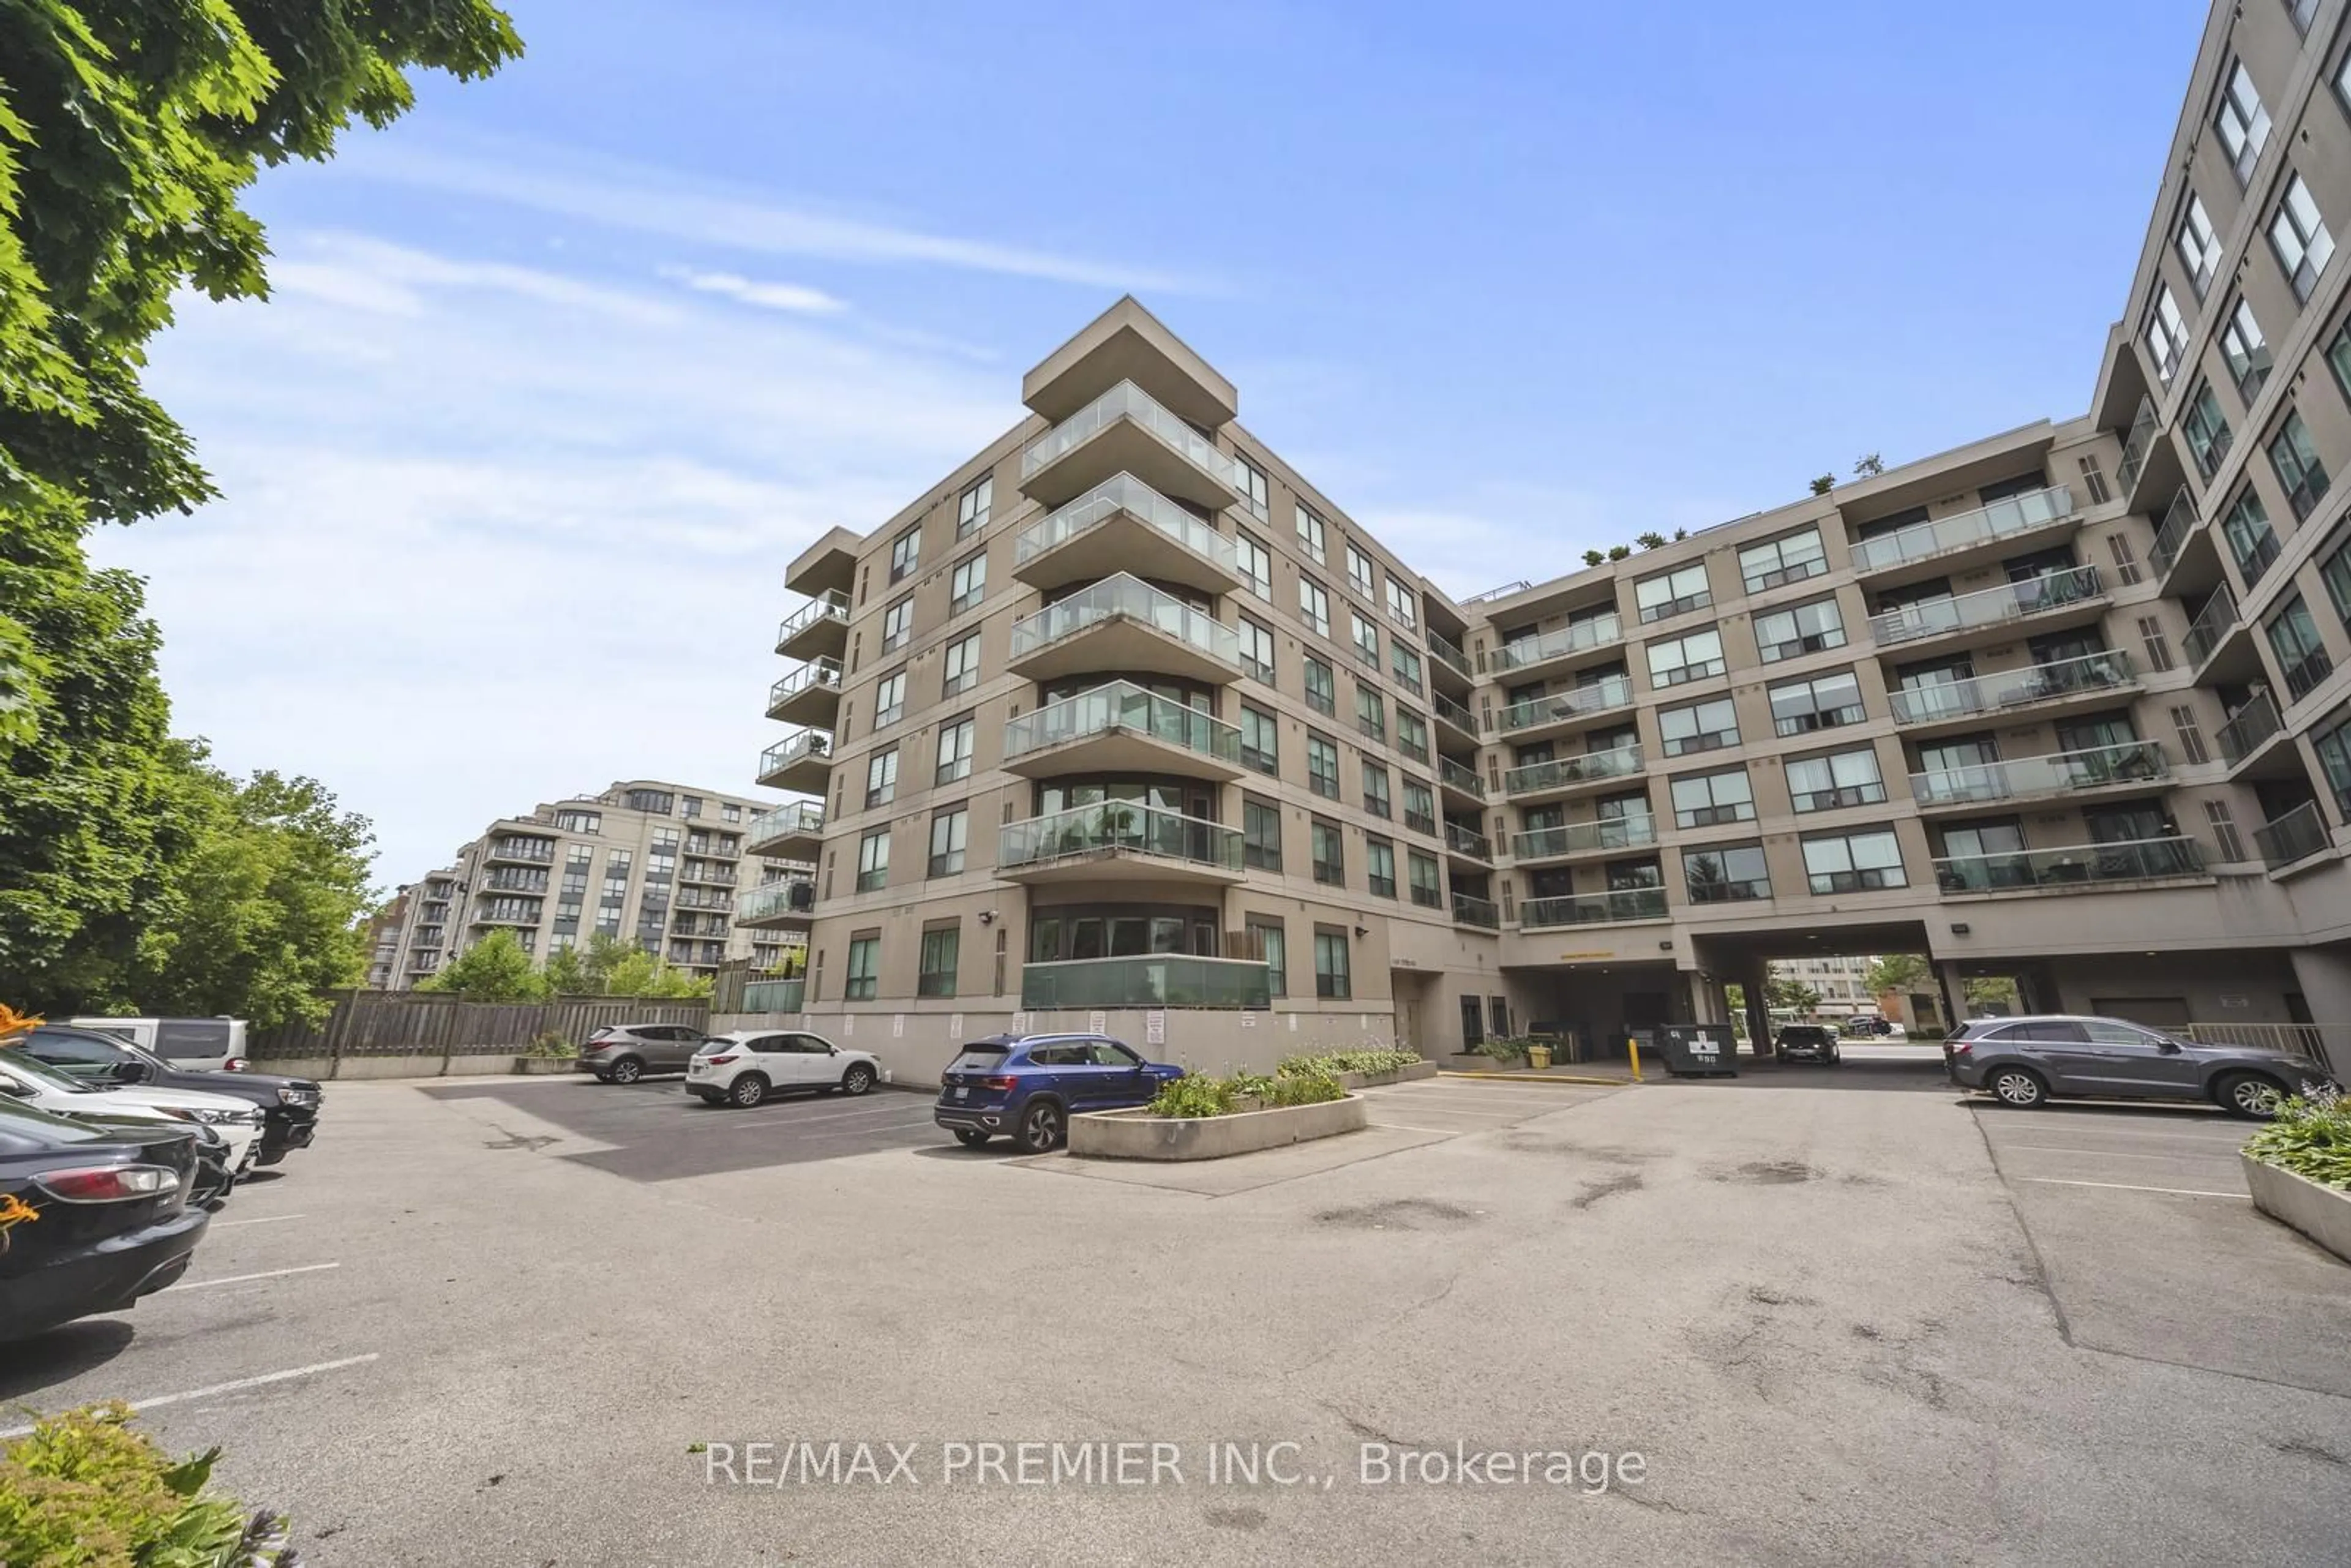 A pic from exterior of the house or condo for 890 Sheppard Ave #213, Toronto Ontario M3H 6B9